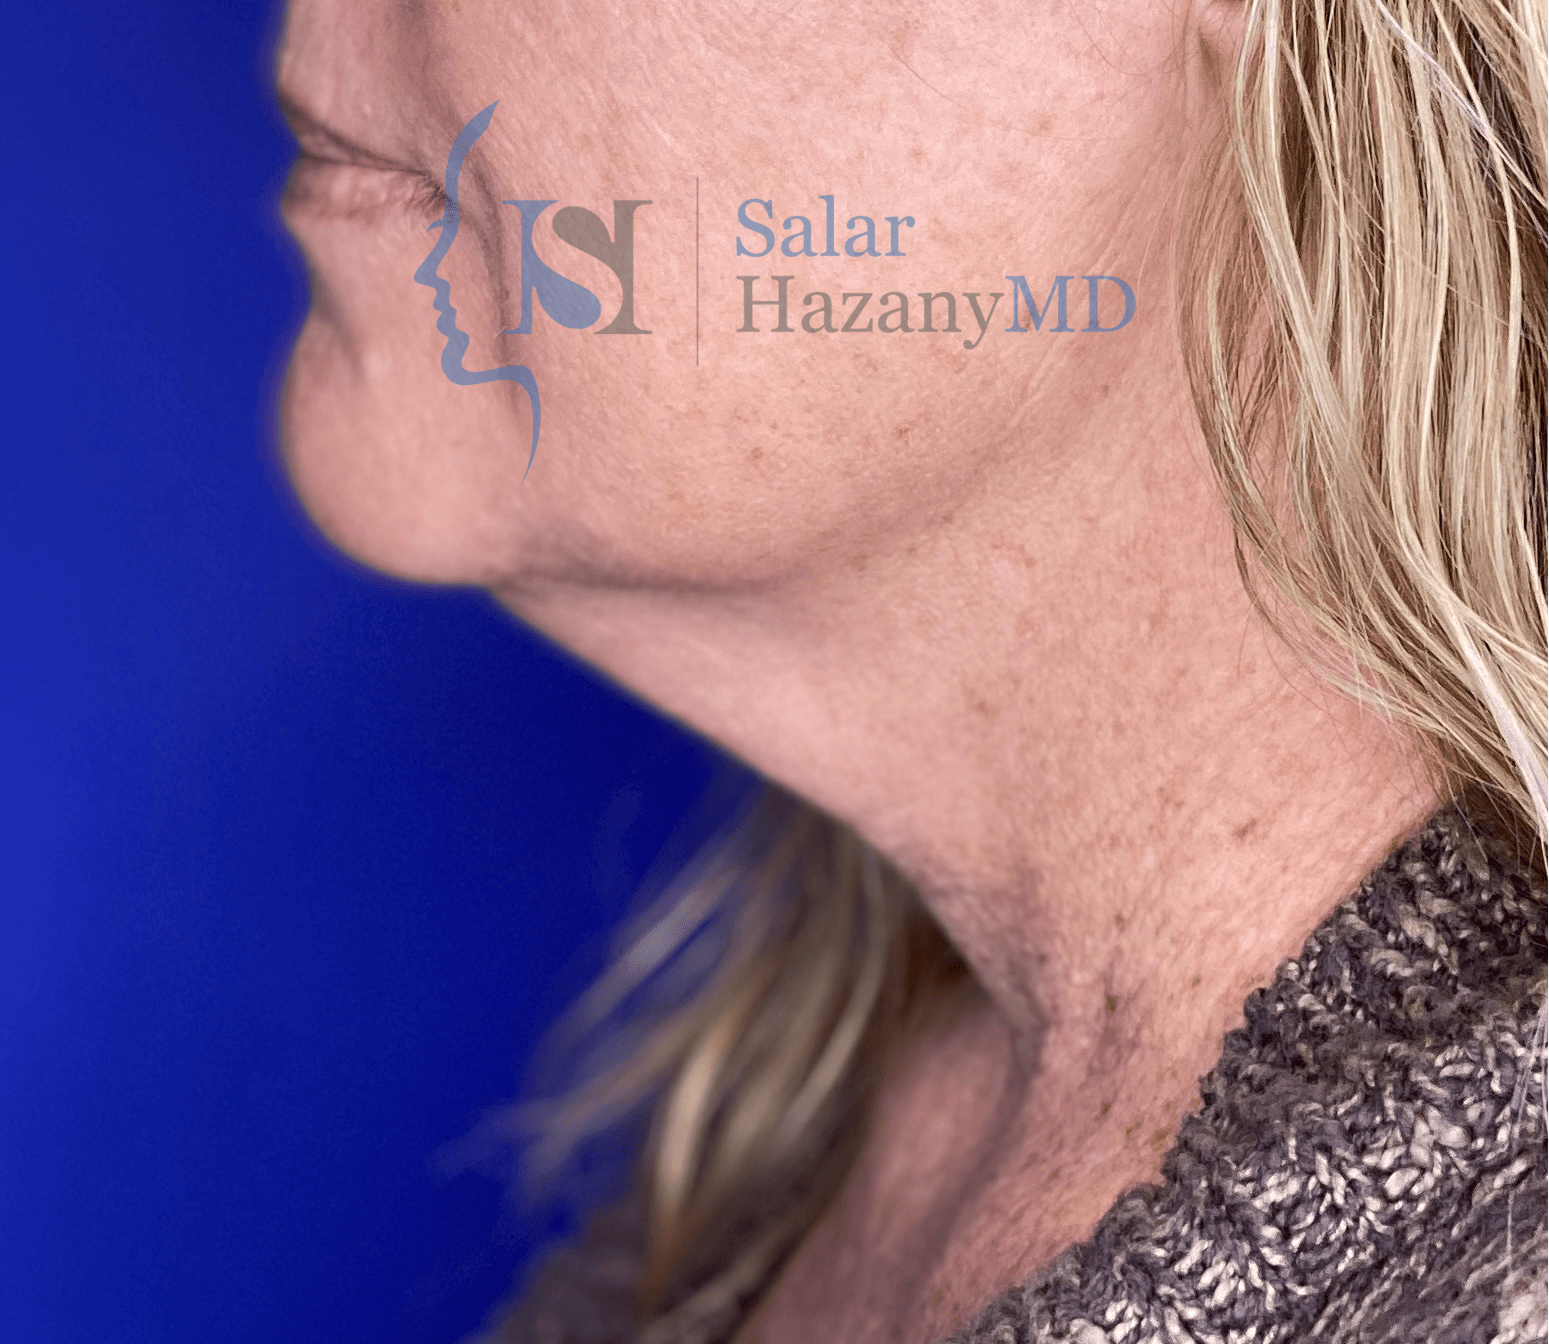 Image before neck lift surgery - woman with loose skin around neck area